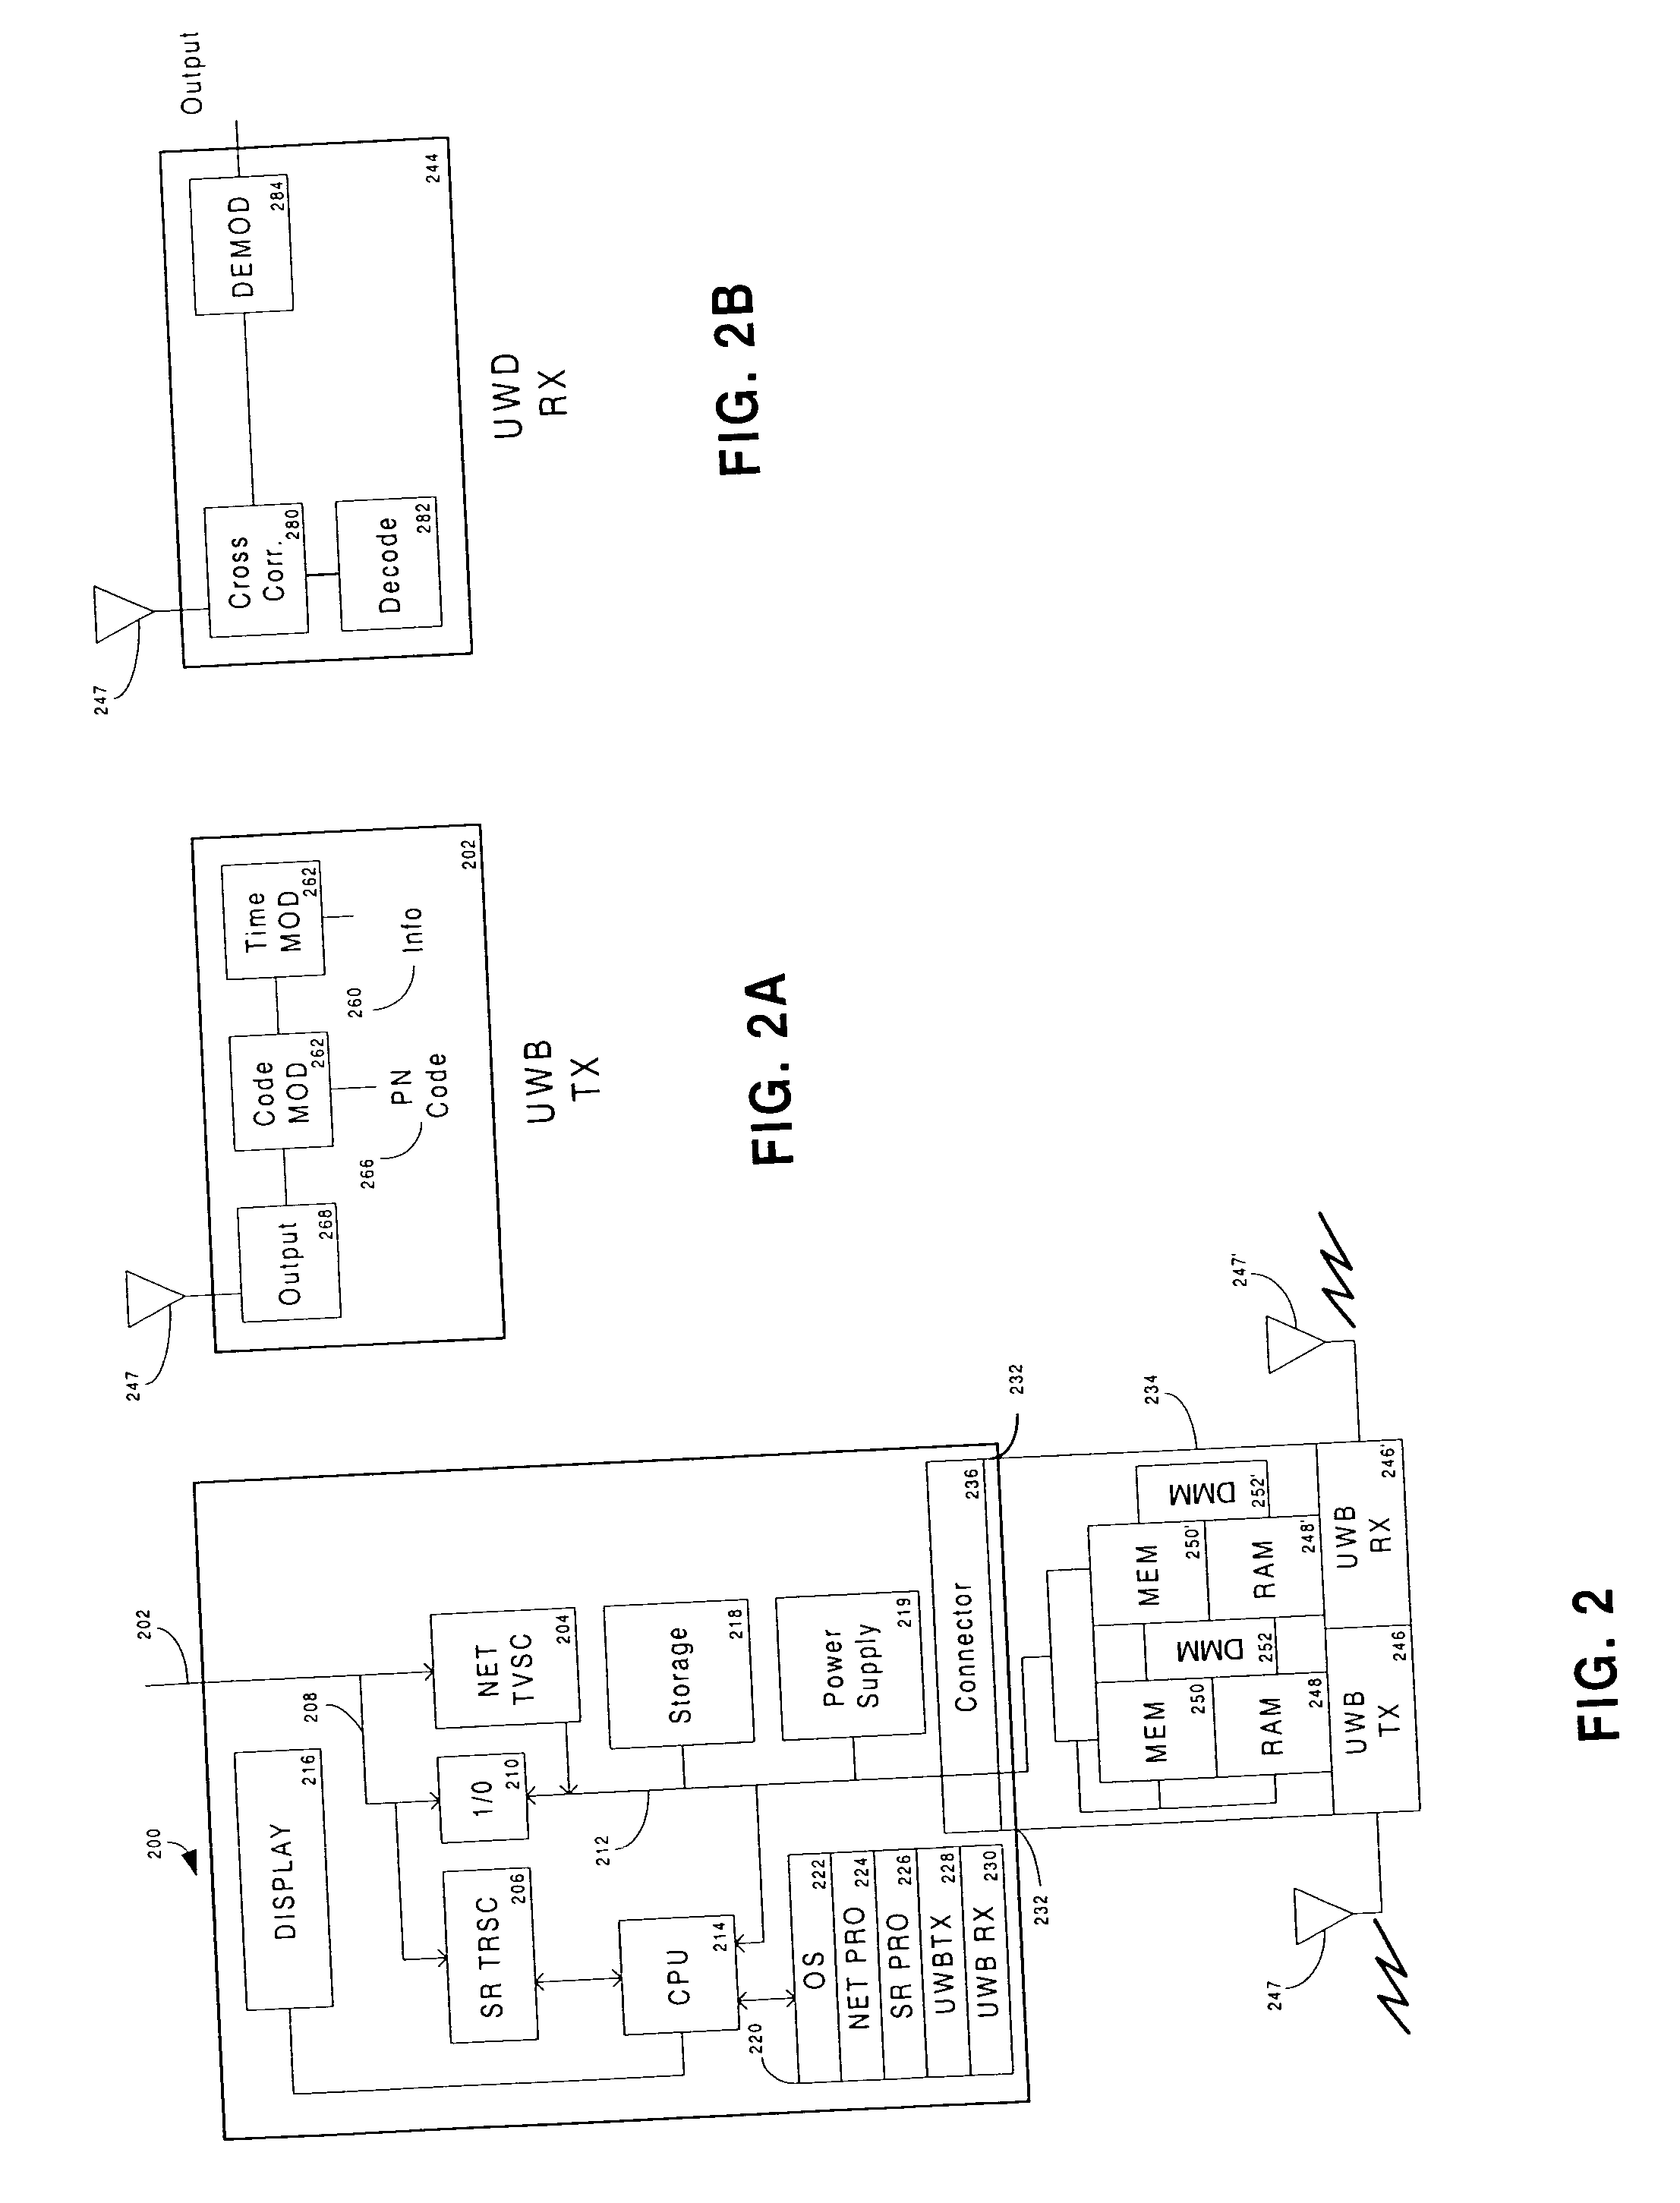 Ultra-wideband/low power communication having a dedicated memory stick for fast data downloads - apparatus, systems and methods